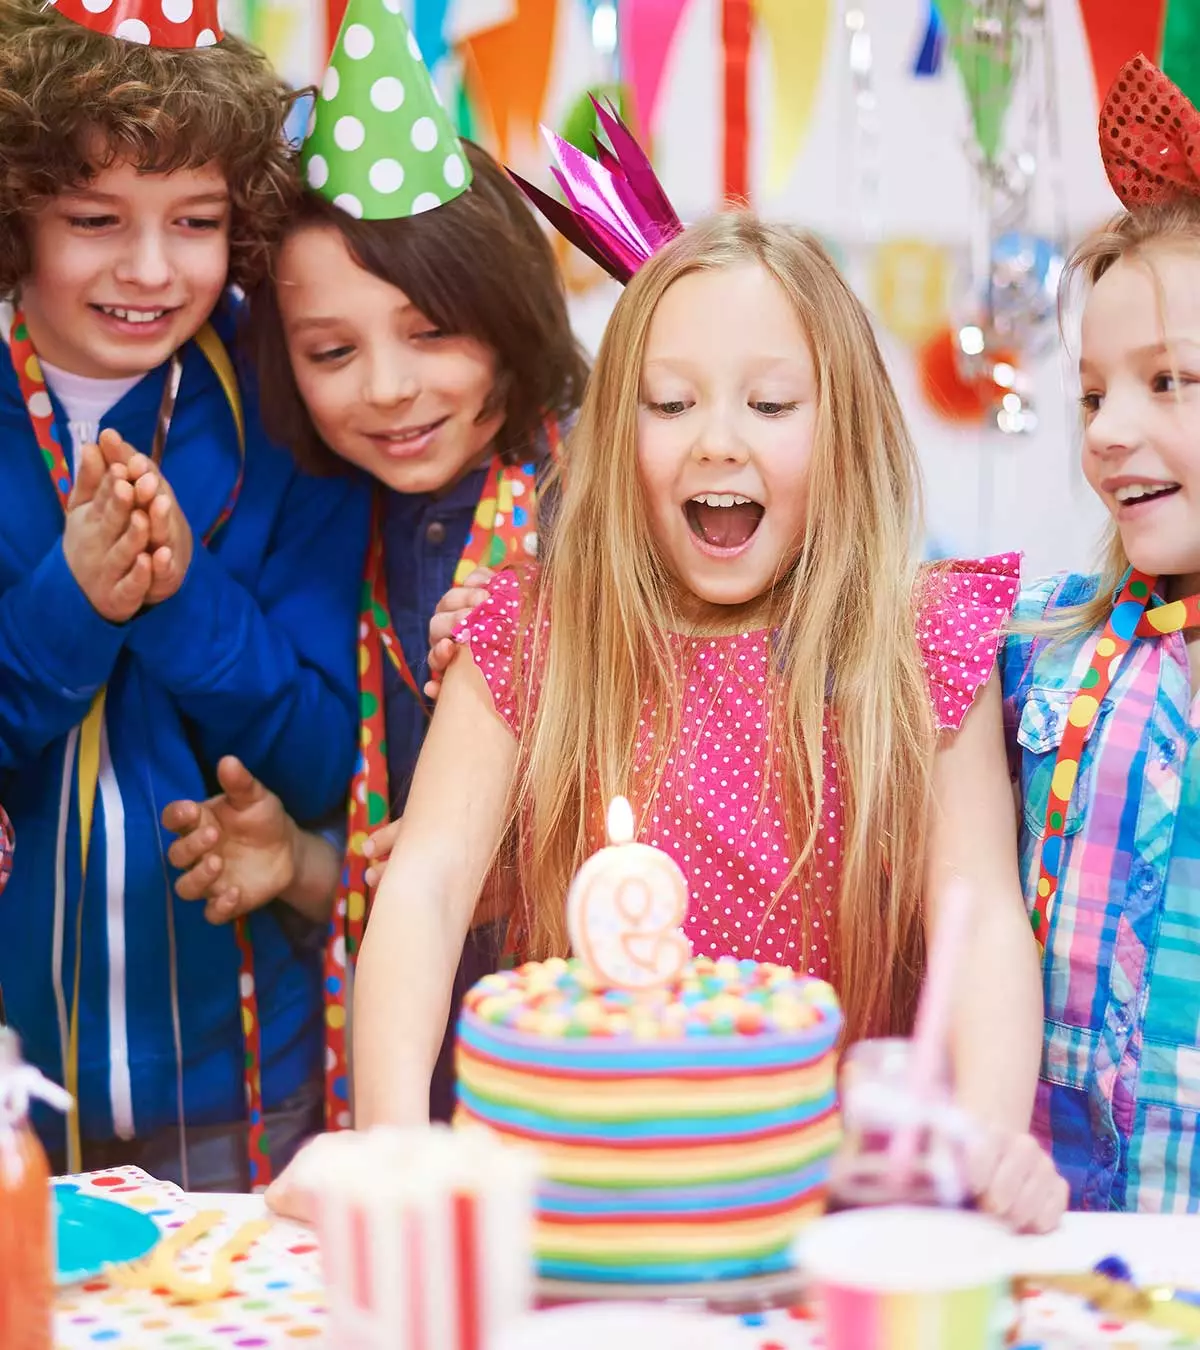 16 Creative And Delicious Birthday Cake Ideas For Kids